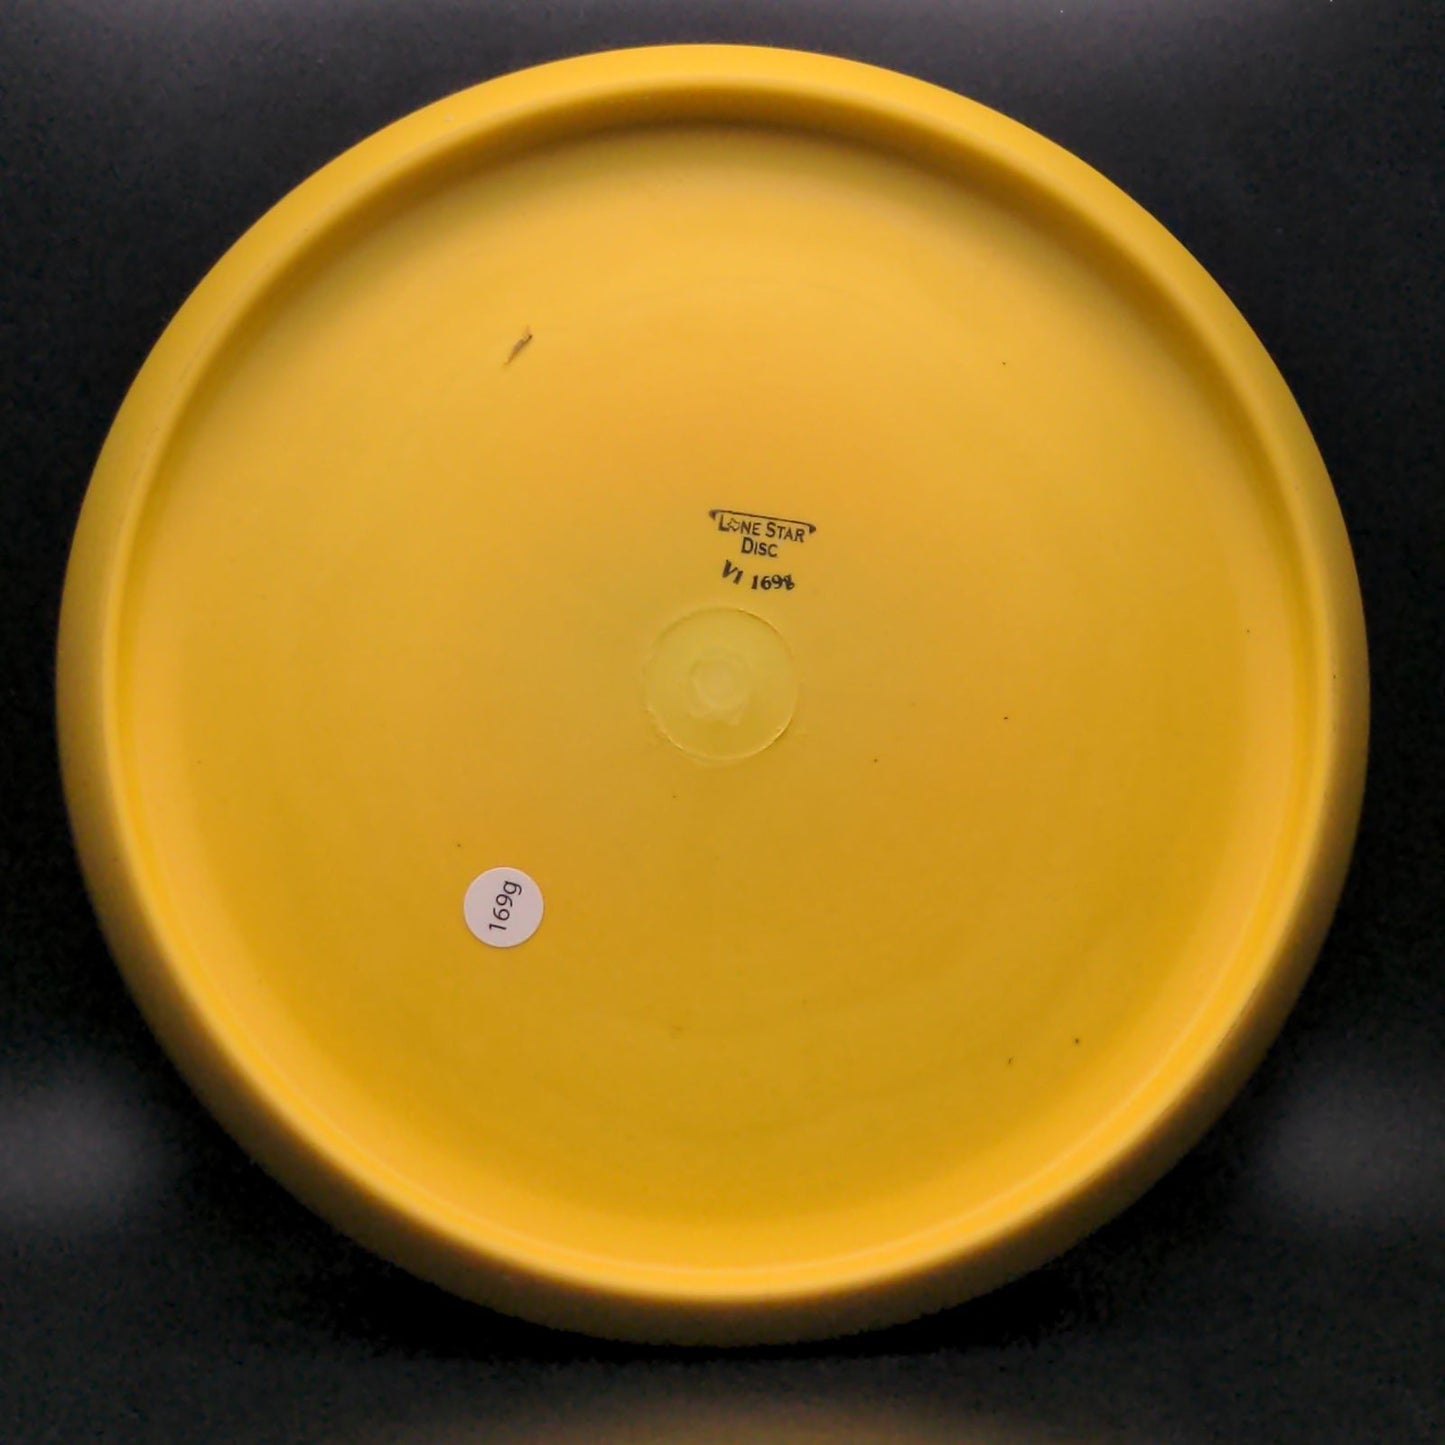 Victor Penny Putter - V1 Lone Star Discs